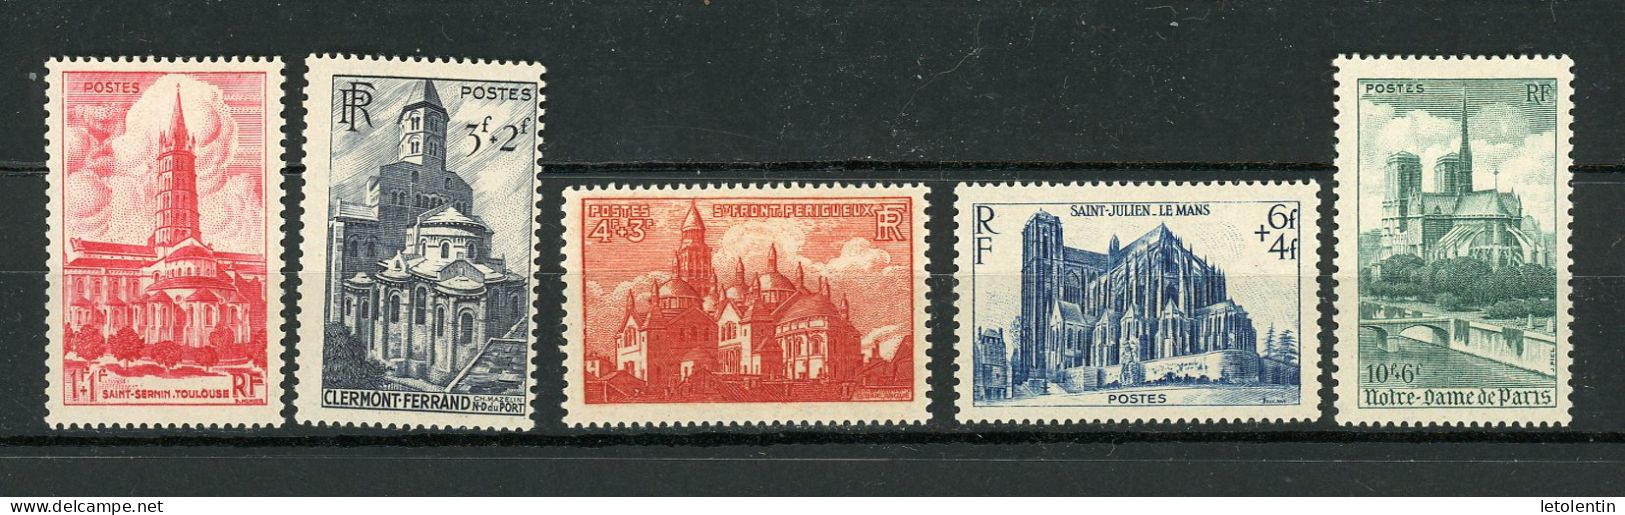 FRANCE - CATHEDRALES - N° Yvert  772/776* - Neufs